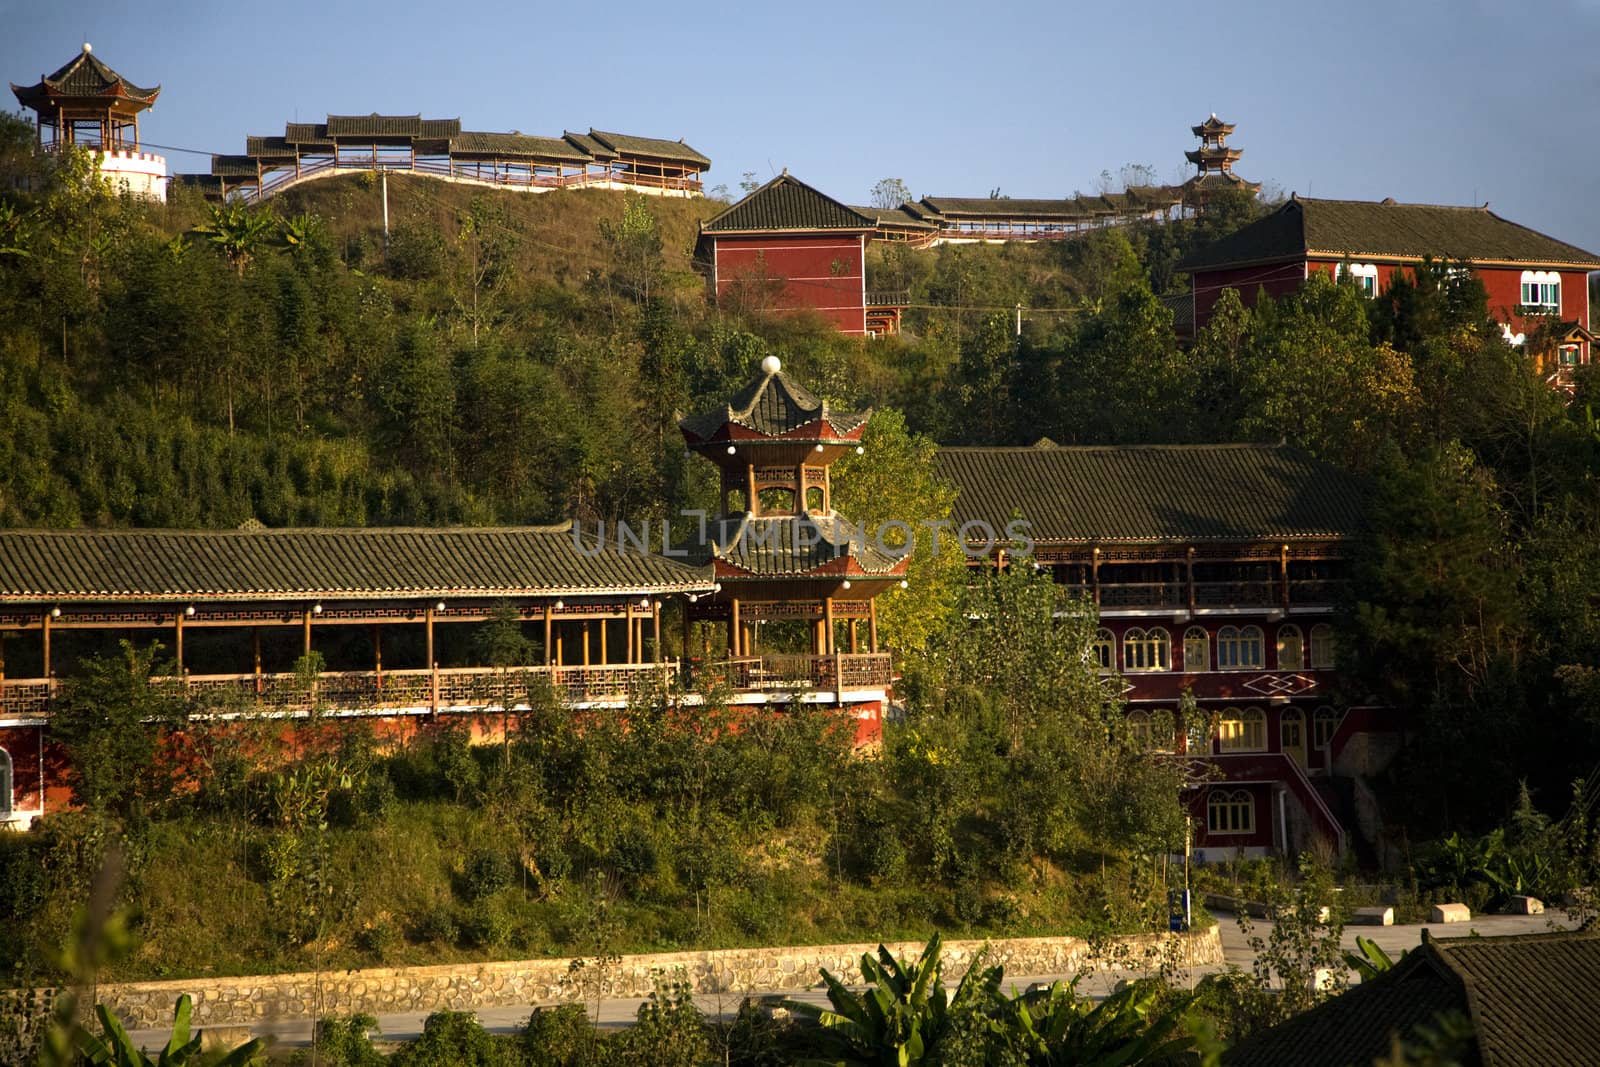 Old Chinese Restaurant Countryside Guizhou Province China